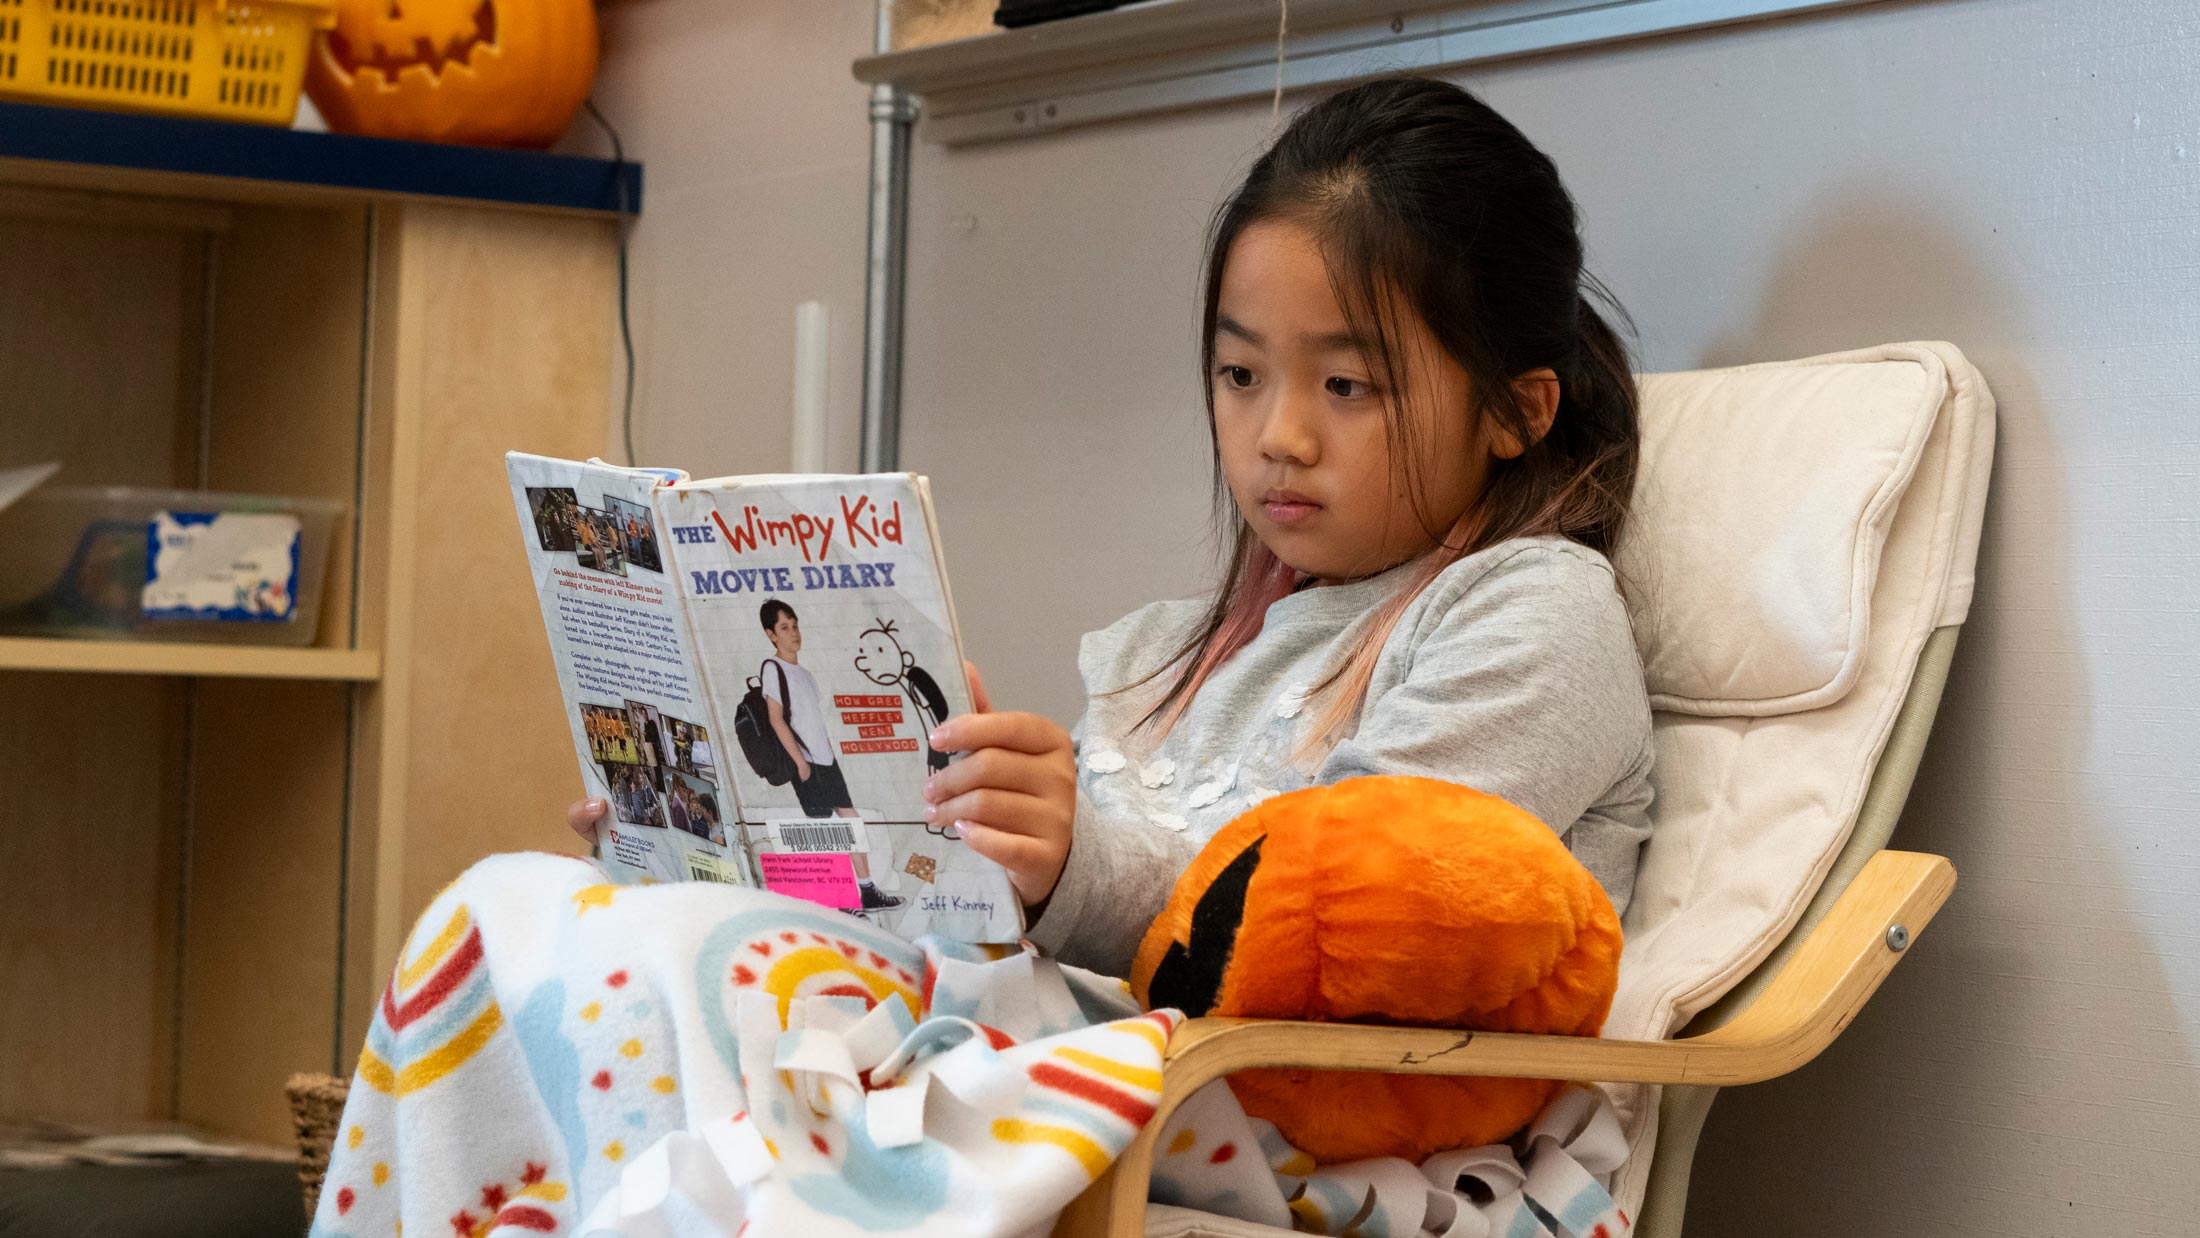 A girl reading a book called: The Wimpy Kid